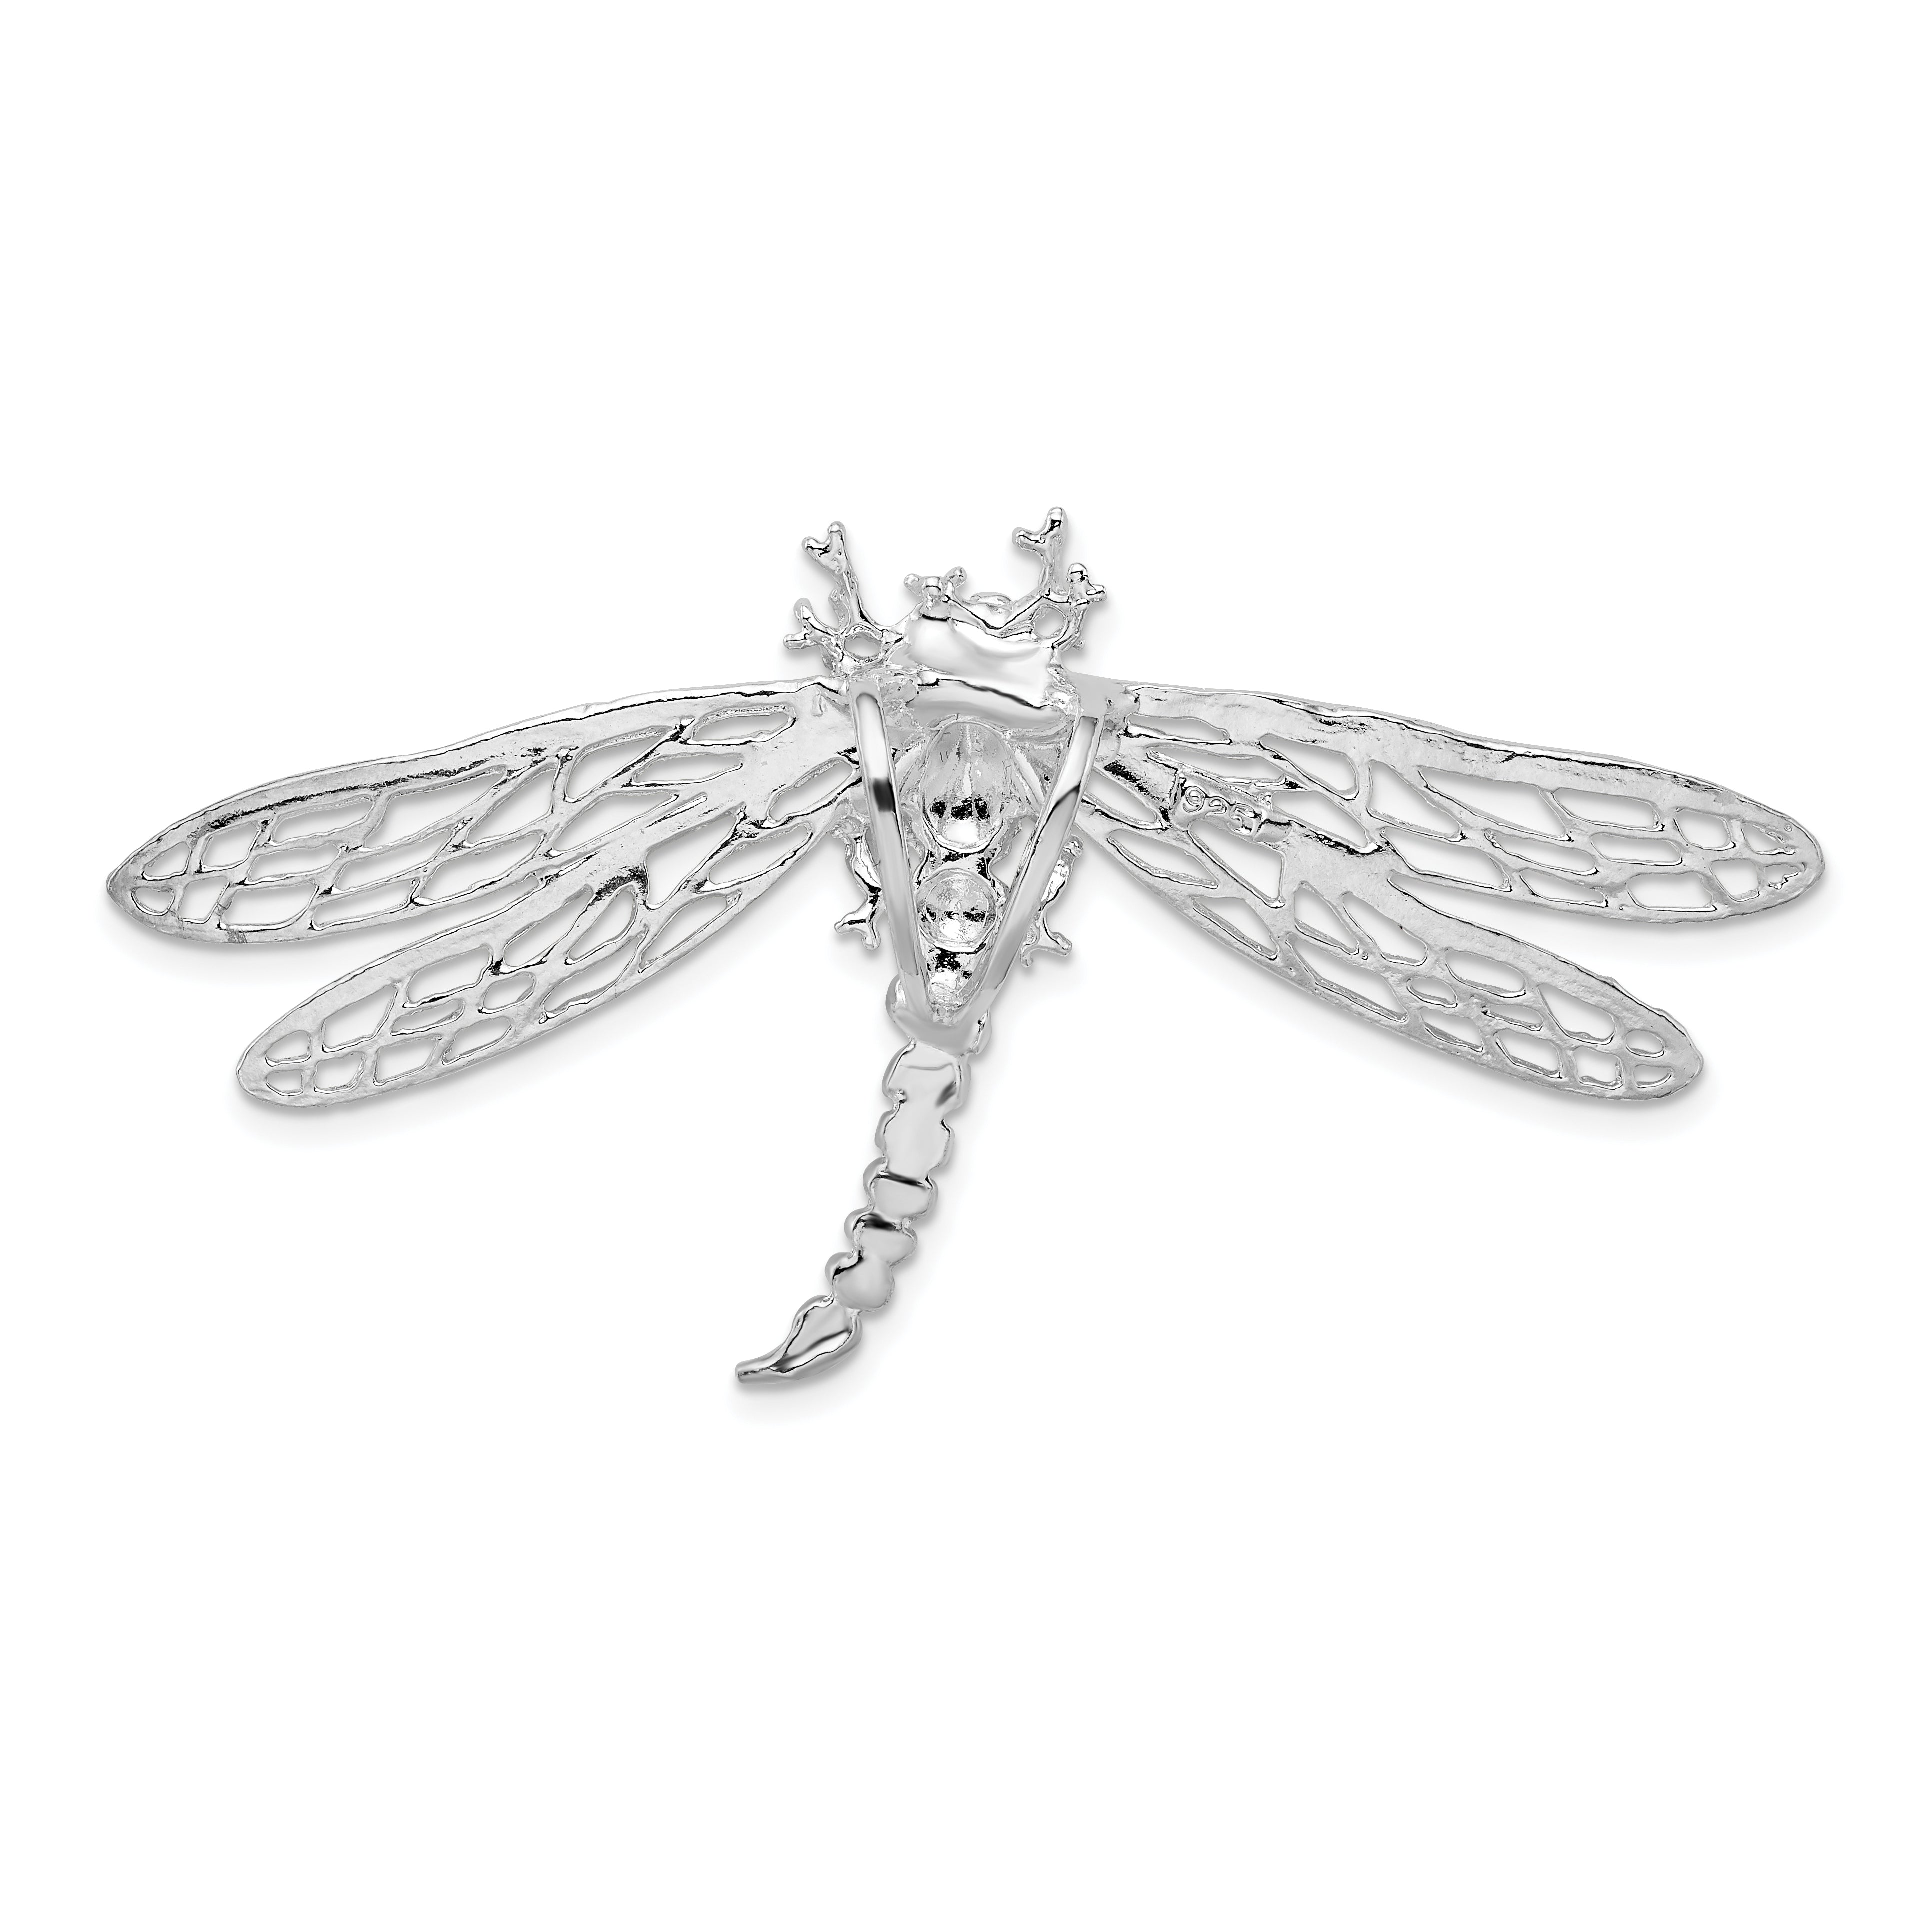 De-Ani Sterling Silver Rhodium-Plated Polished Dragonfly with Filigree Wings Slide